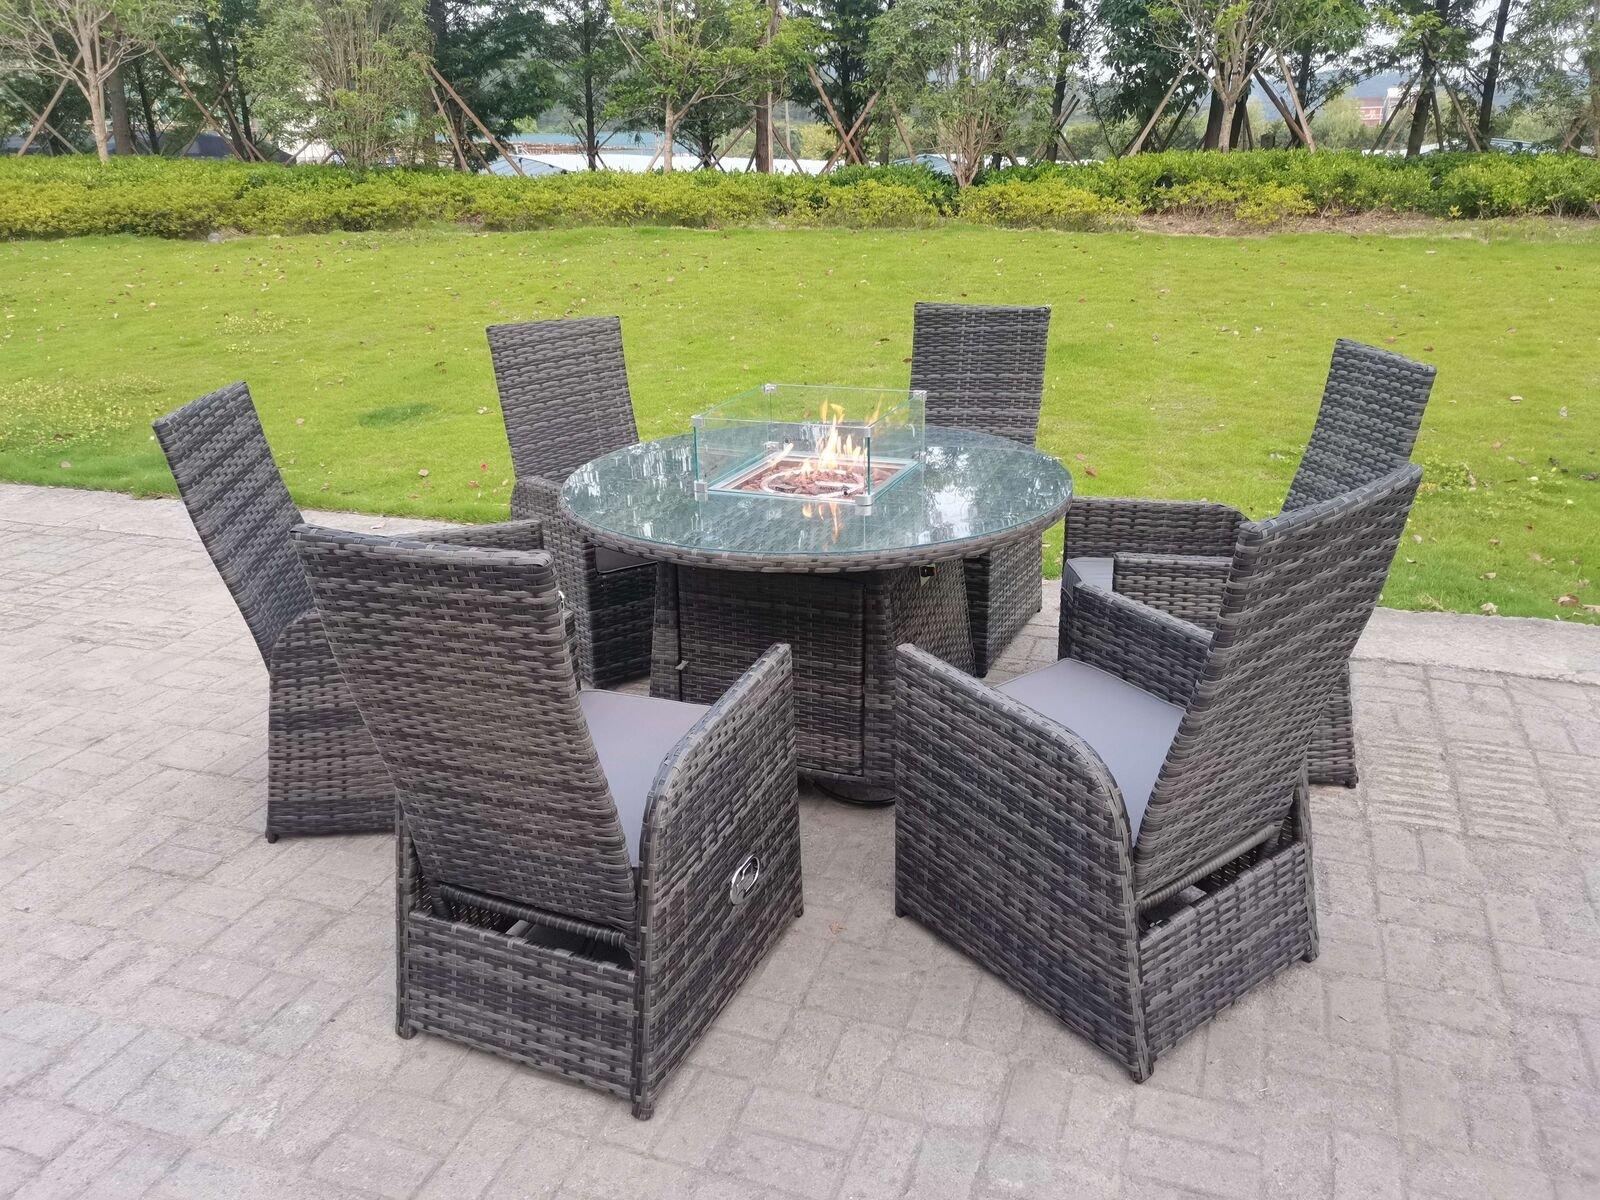 Rattan Garden Furniture Gas Fire Pit Round Dining Table And Chairs 6 Seater Plus Round Table